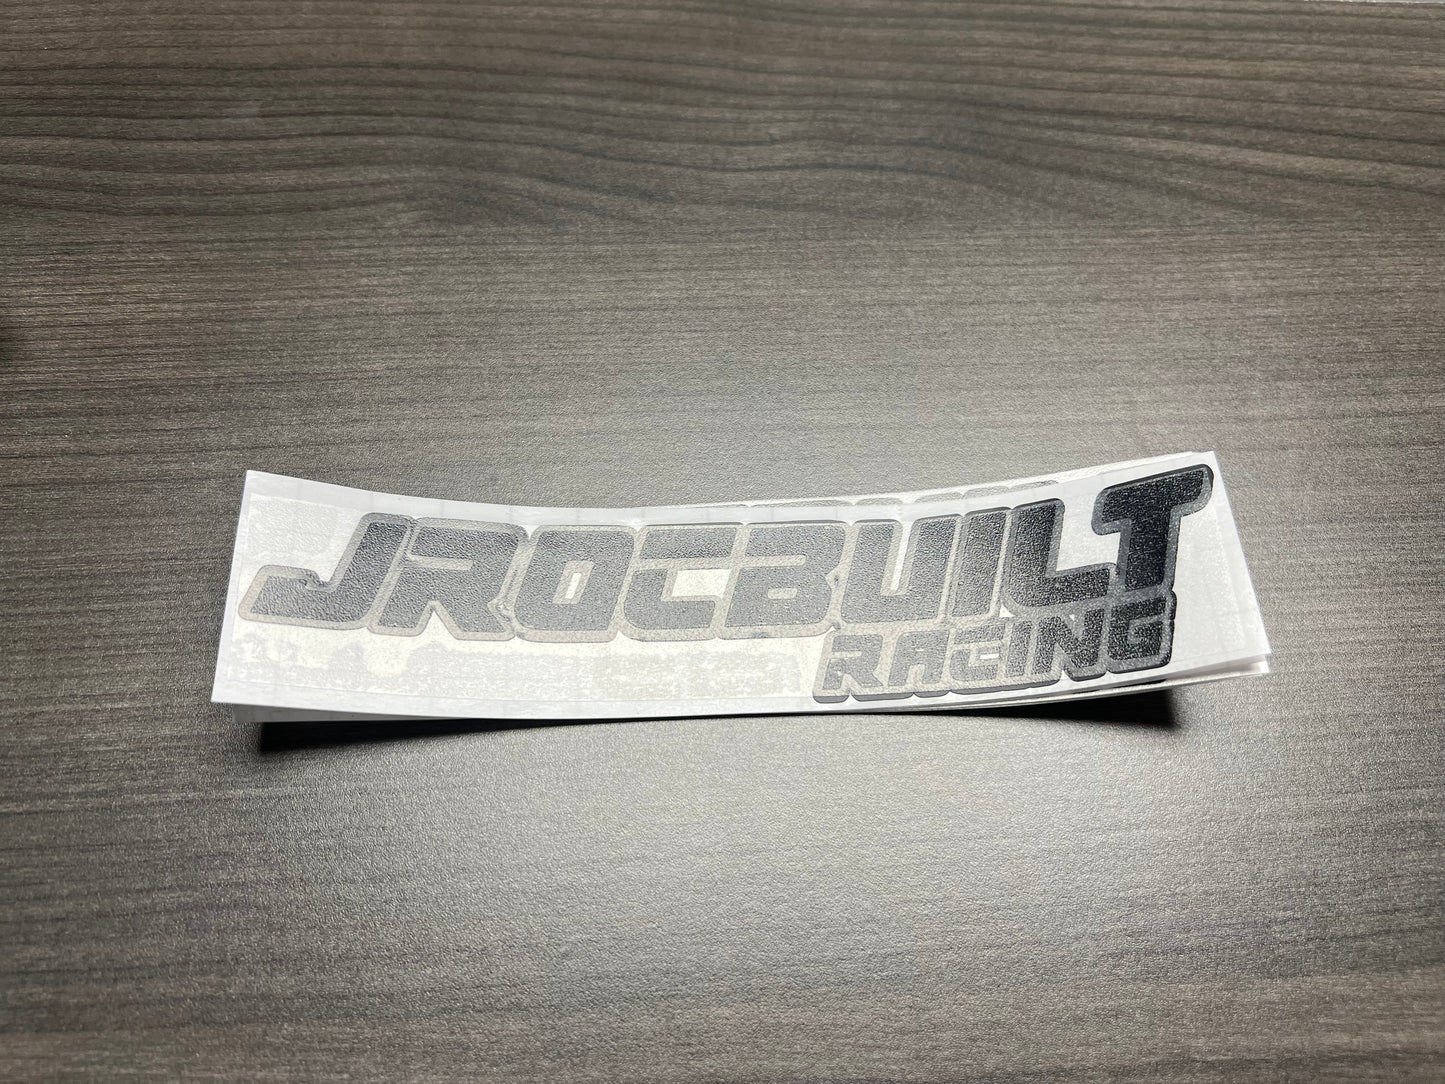 Jroc Built Racing Decal (LIMITED EDITION)